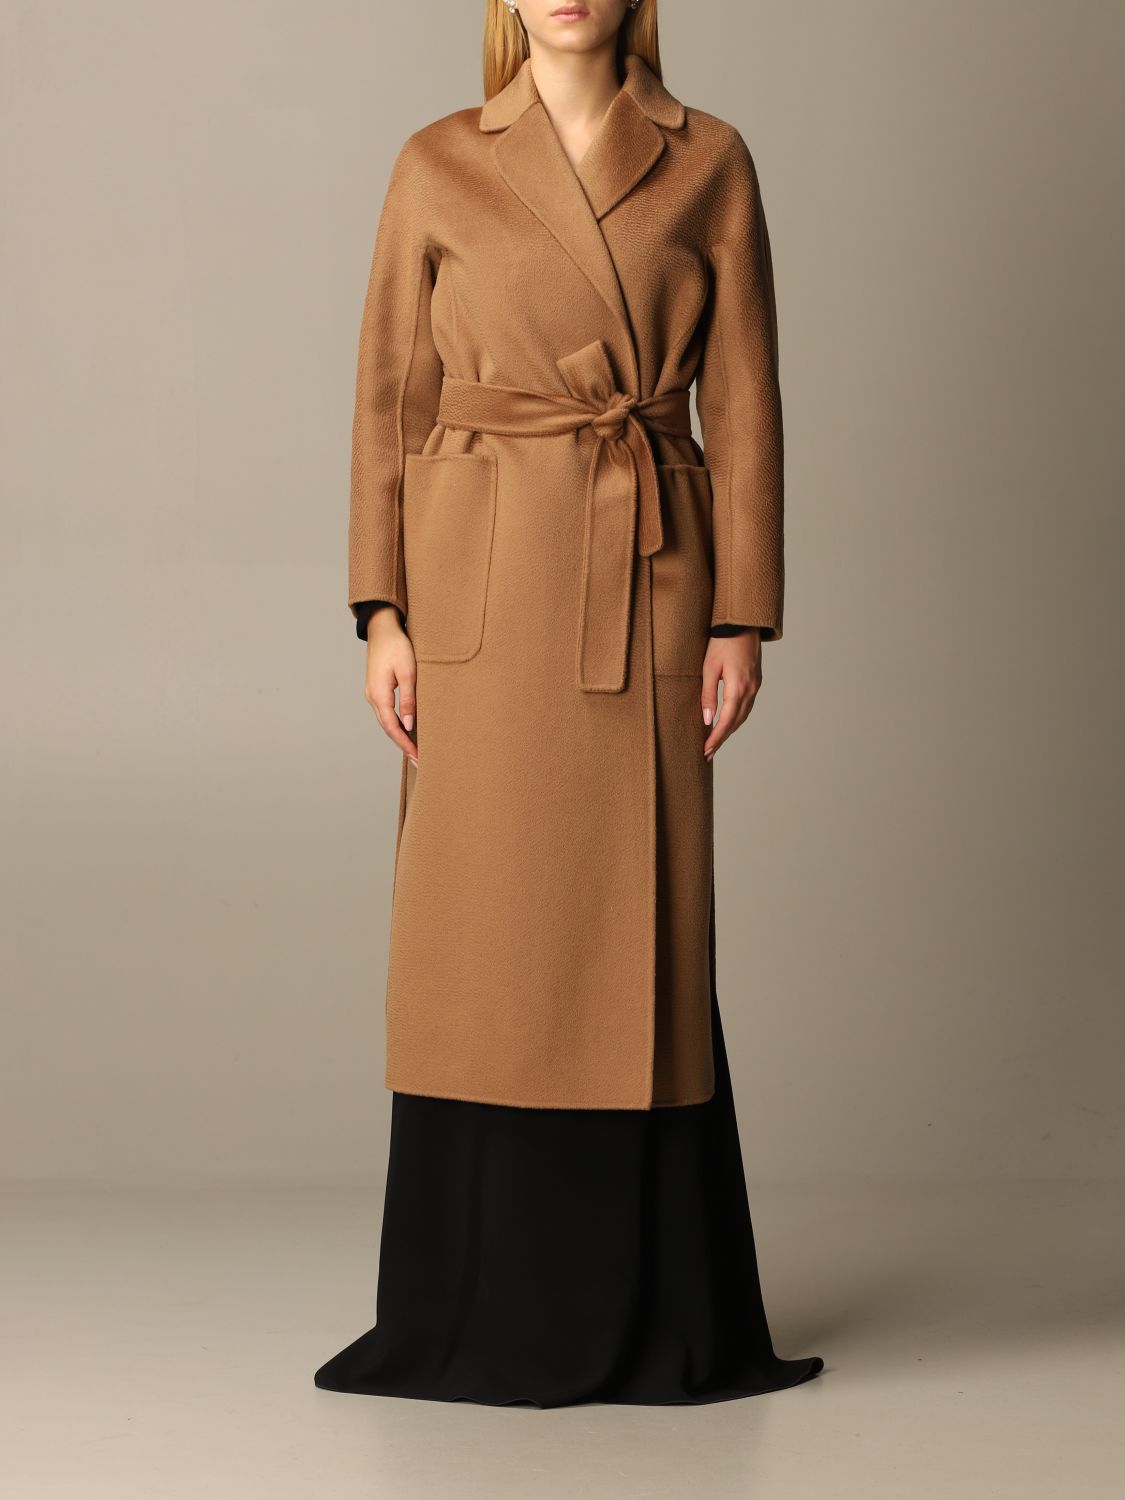 S MAX MARA: Amore coat in virgin wool and cashmere - Camel | Coat S Max